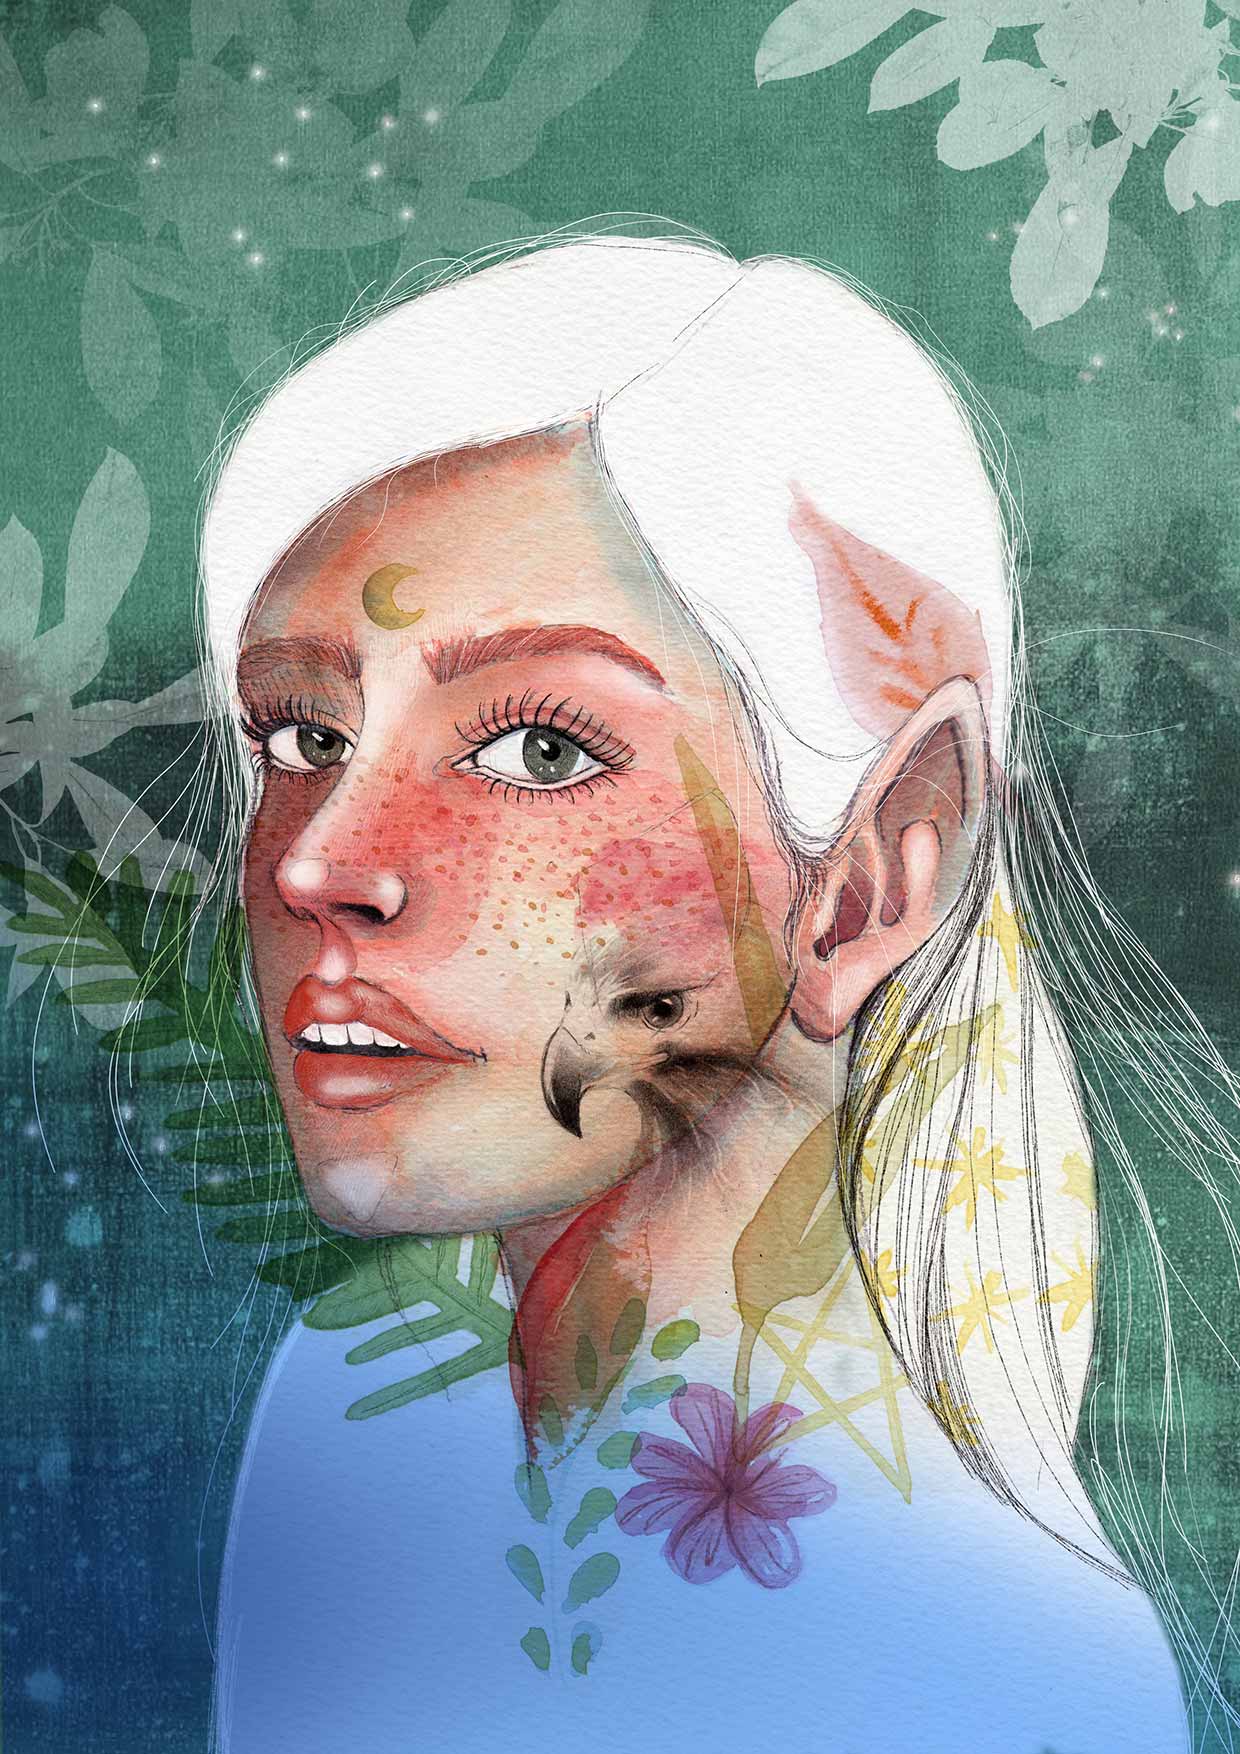 Portrait of elf girl with freckles and nature elements in background